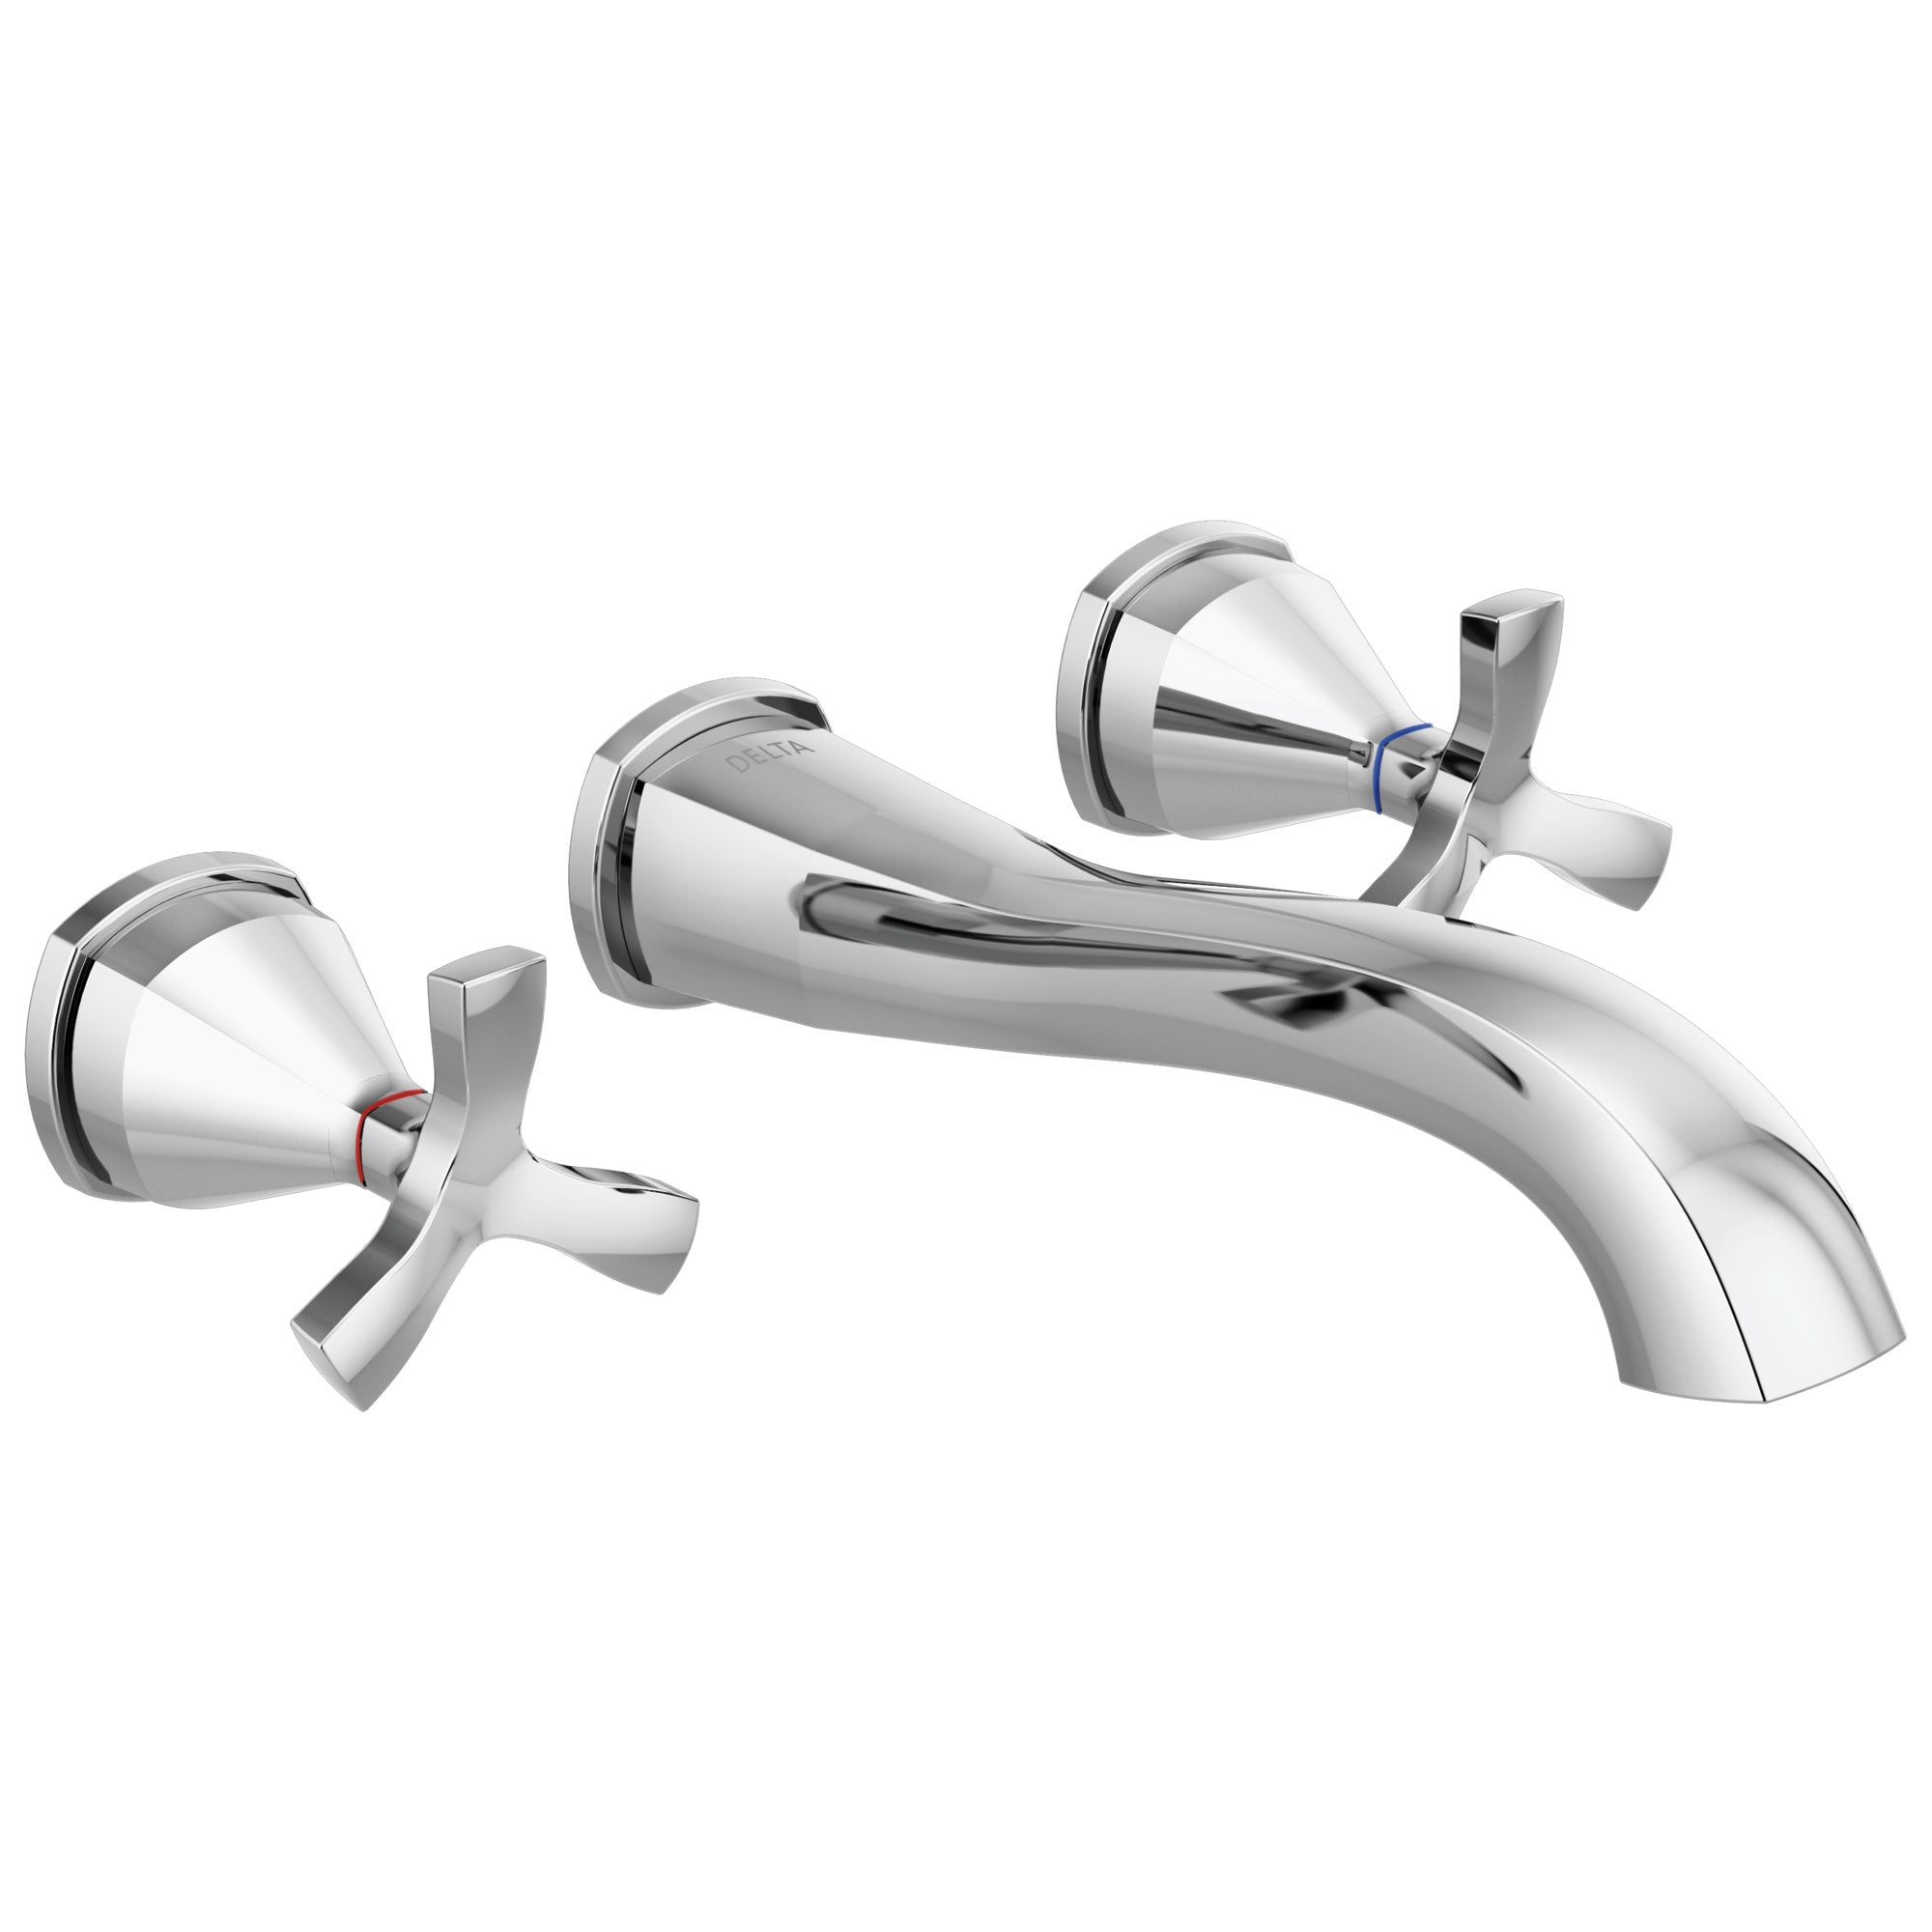 Delta Stryke Chrome Finish Helo Cross Handle Wall Mount Bathroom Sink Faucet Includes Rough-in Valve D3063V